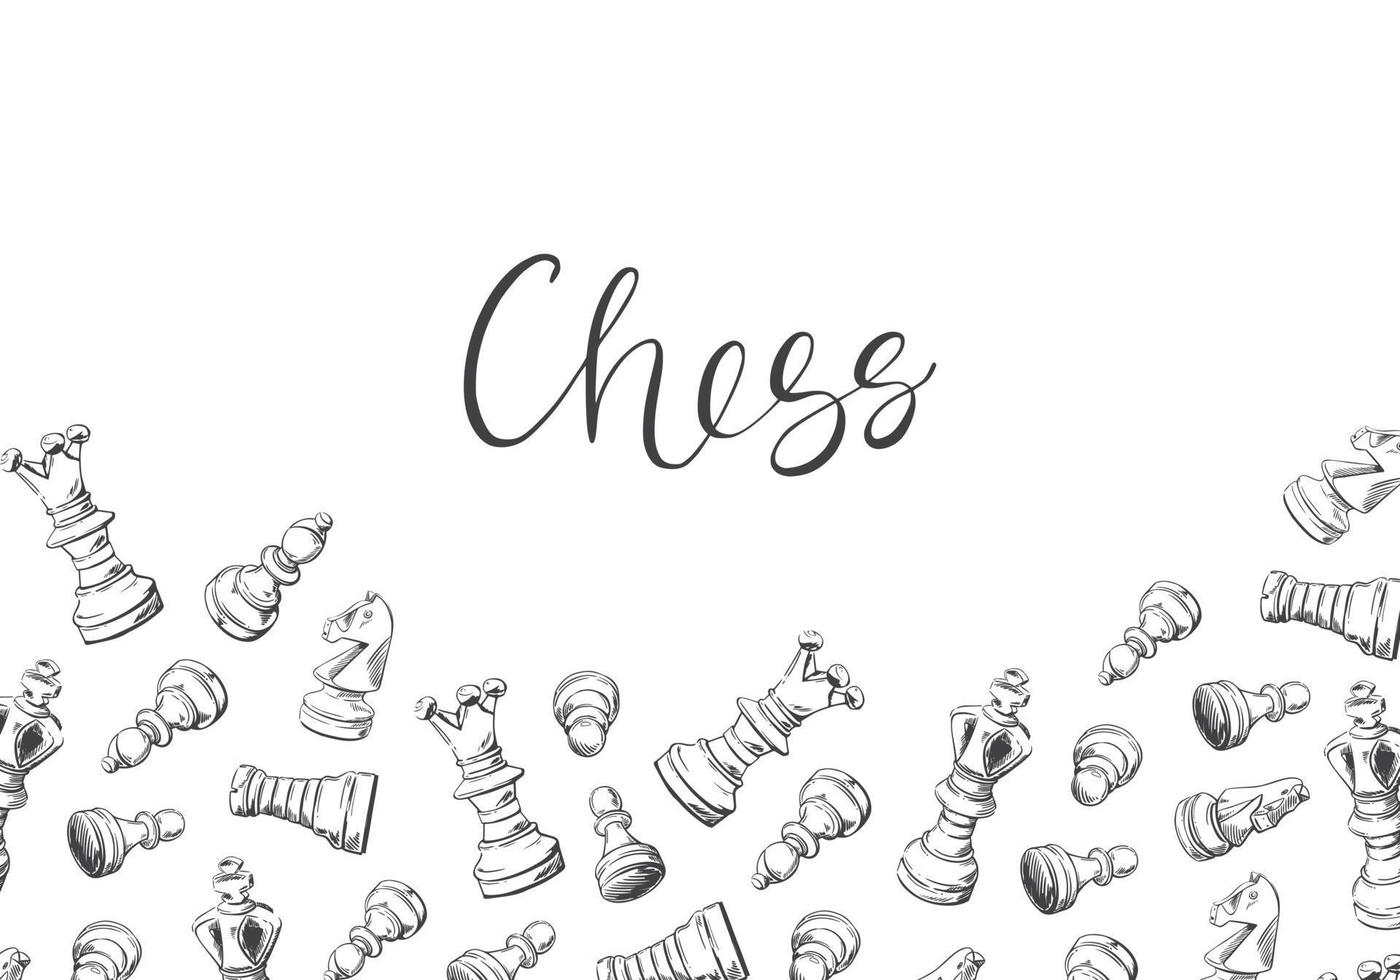 Banner with chess pieces. Background of the intellectual game. Hand-drawn vector illustration for a chess club, tournaments banner, frame, brochure background